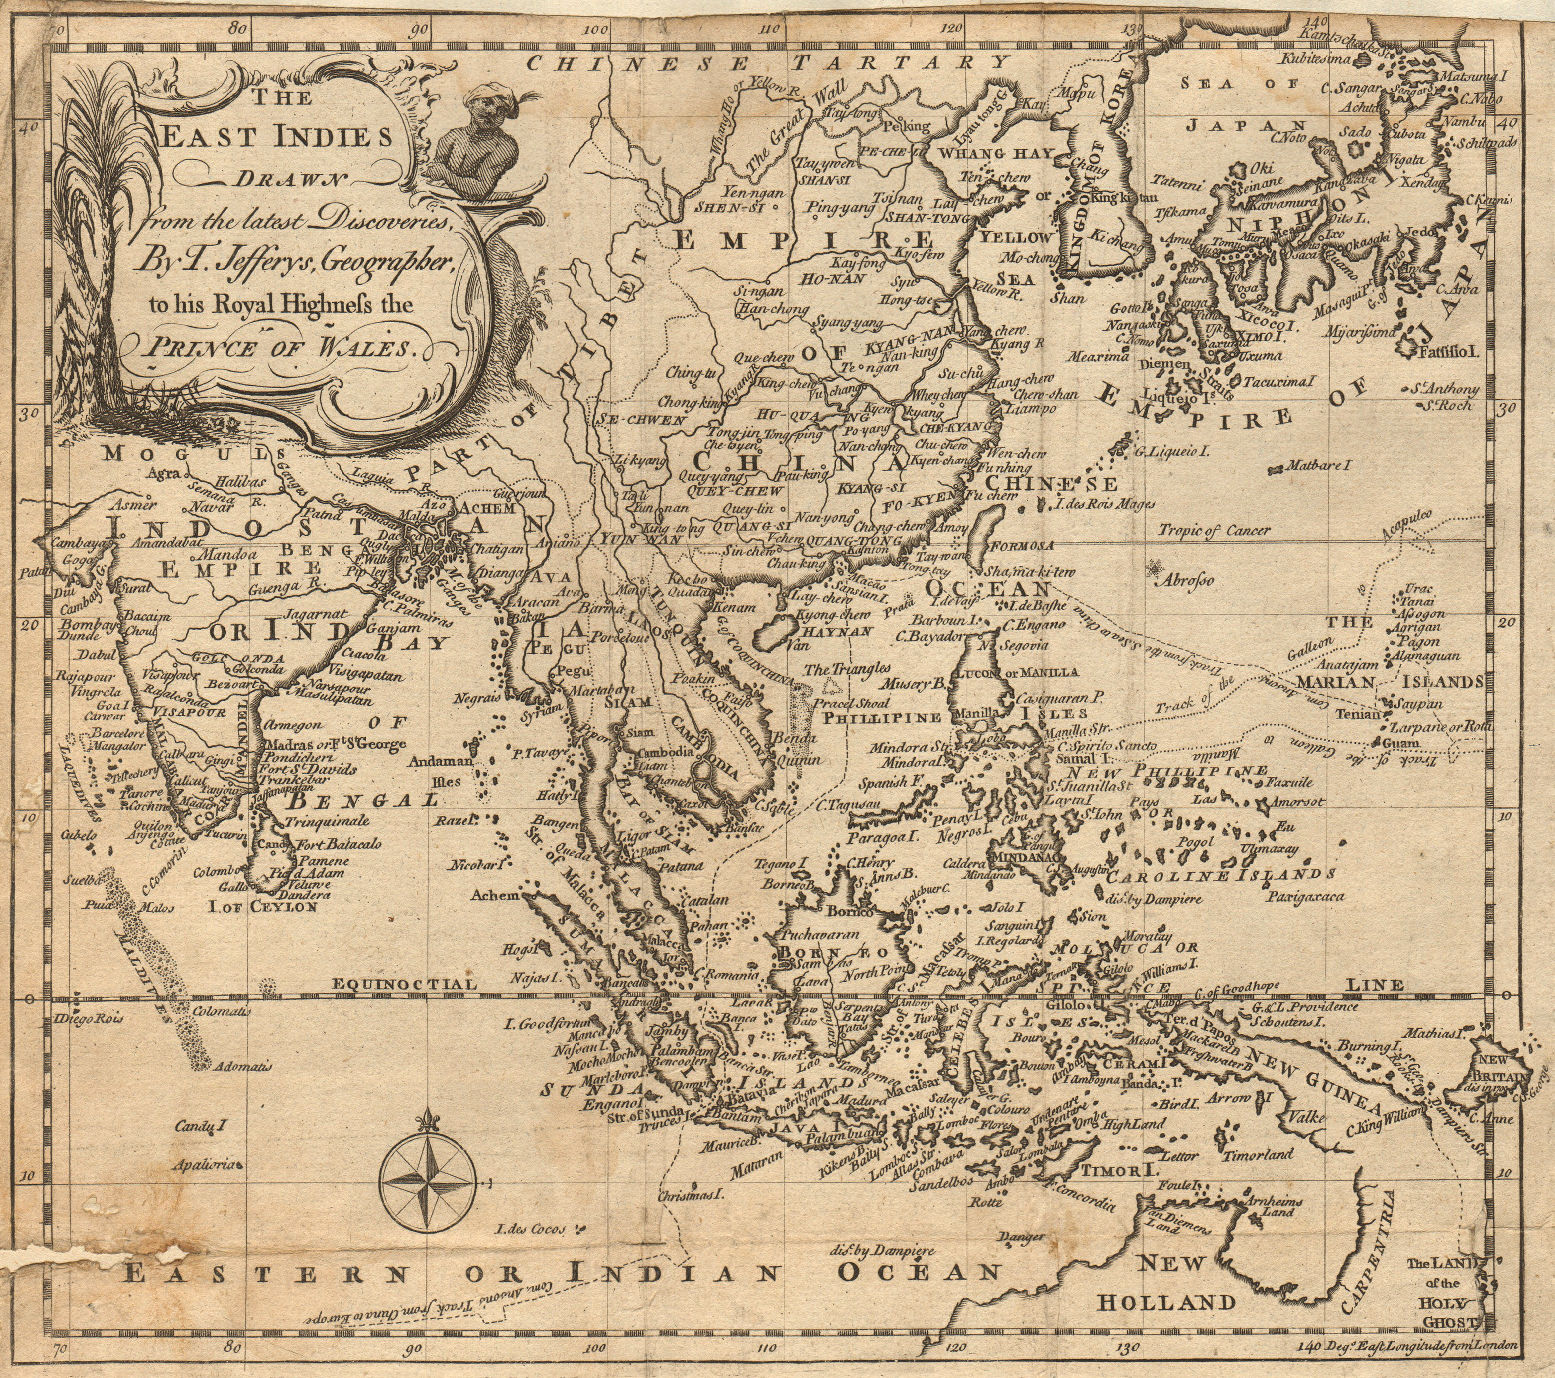 Associate Product The East Indies drawn from the latest discoveries by T. Jefferys. Asia 1748 map